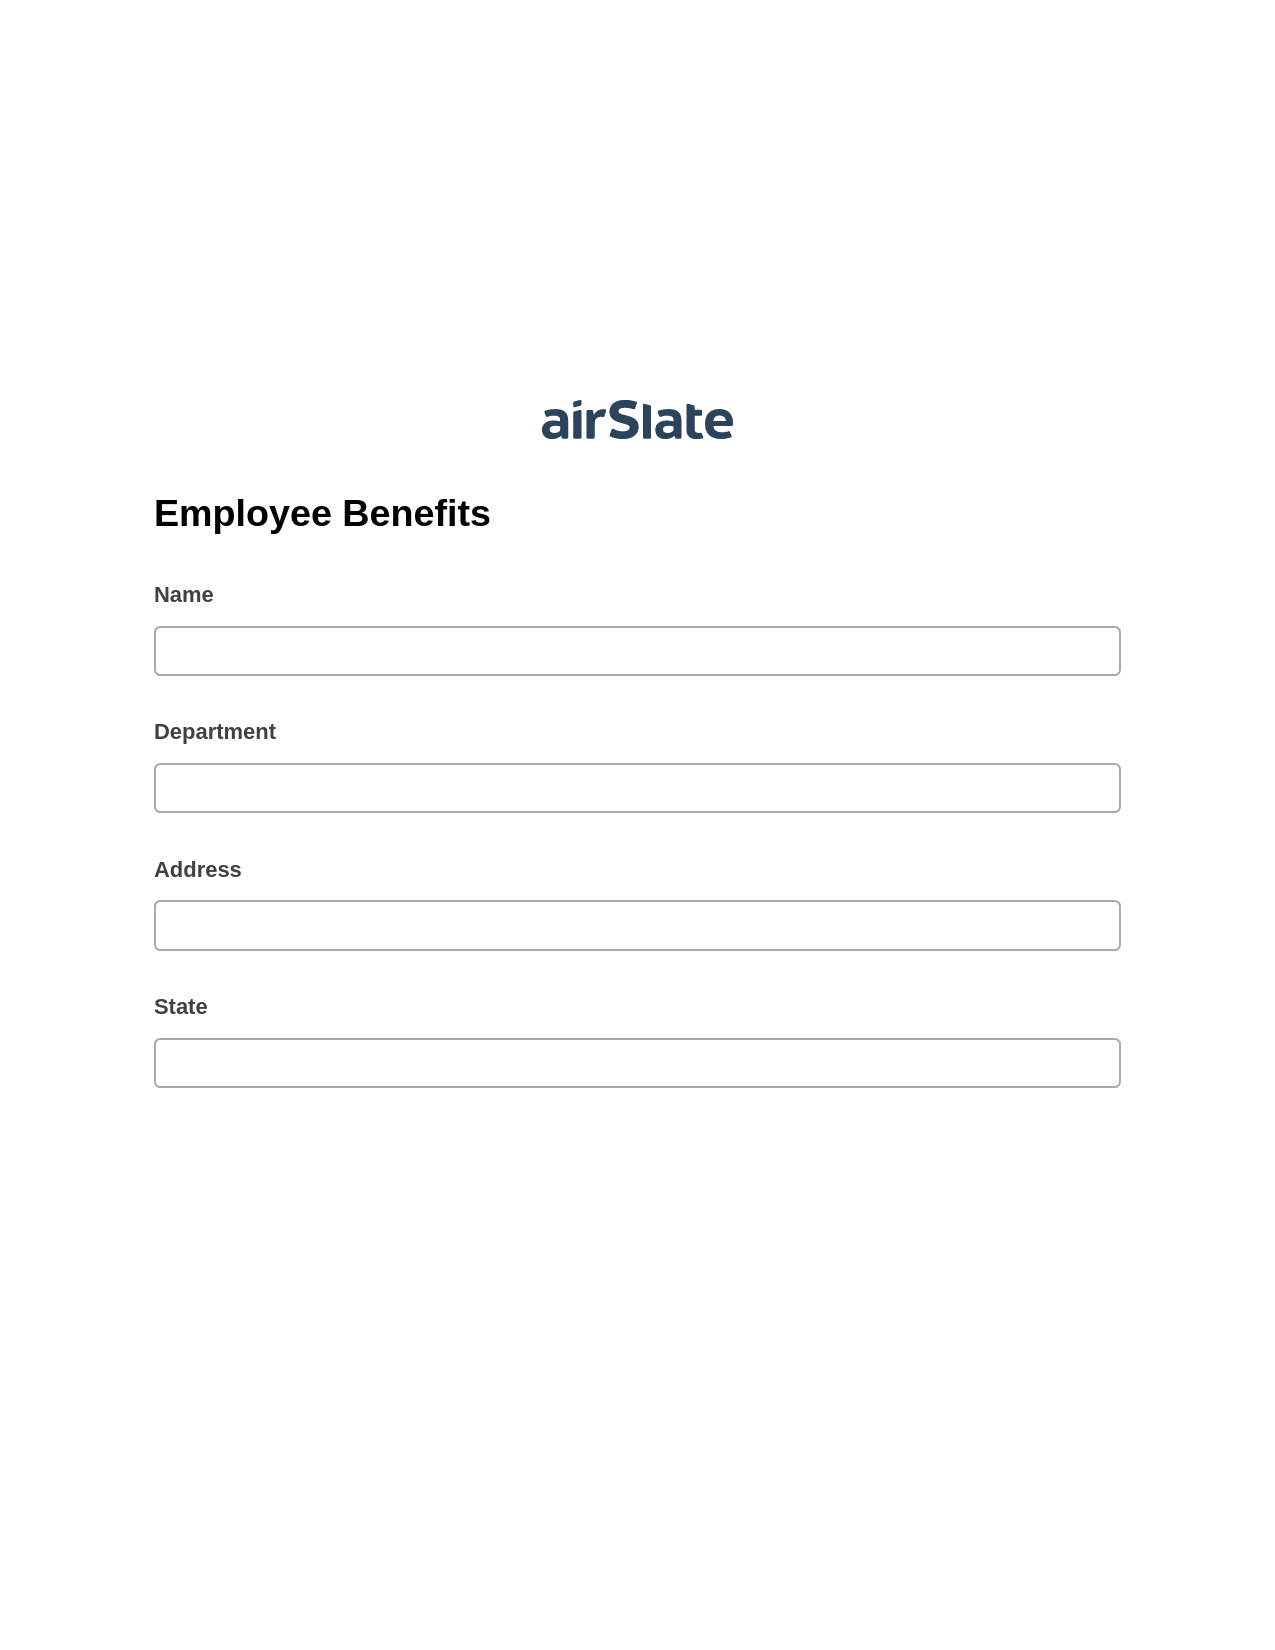 Employee Benefits System Bot - Slack Two-Way Binding Bot, Send a Slate with Roles Bot, Export to Google Sheet Bot